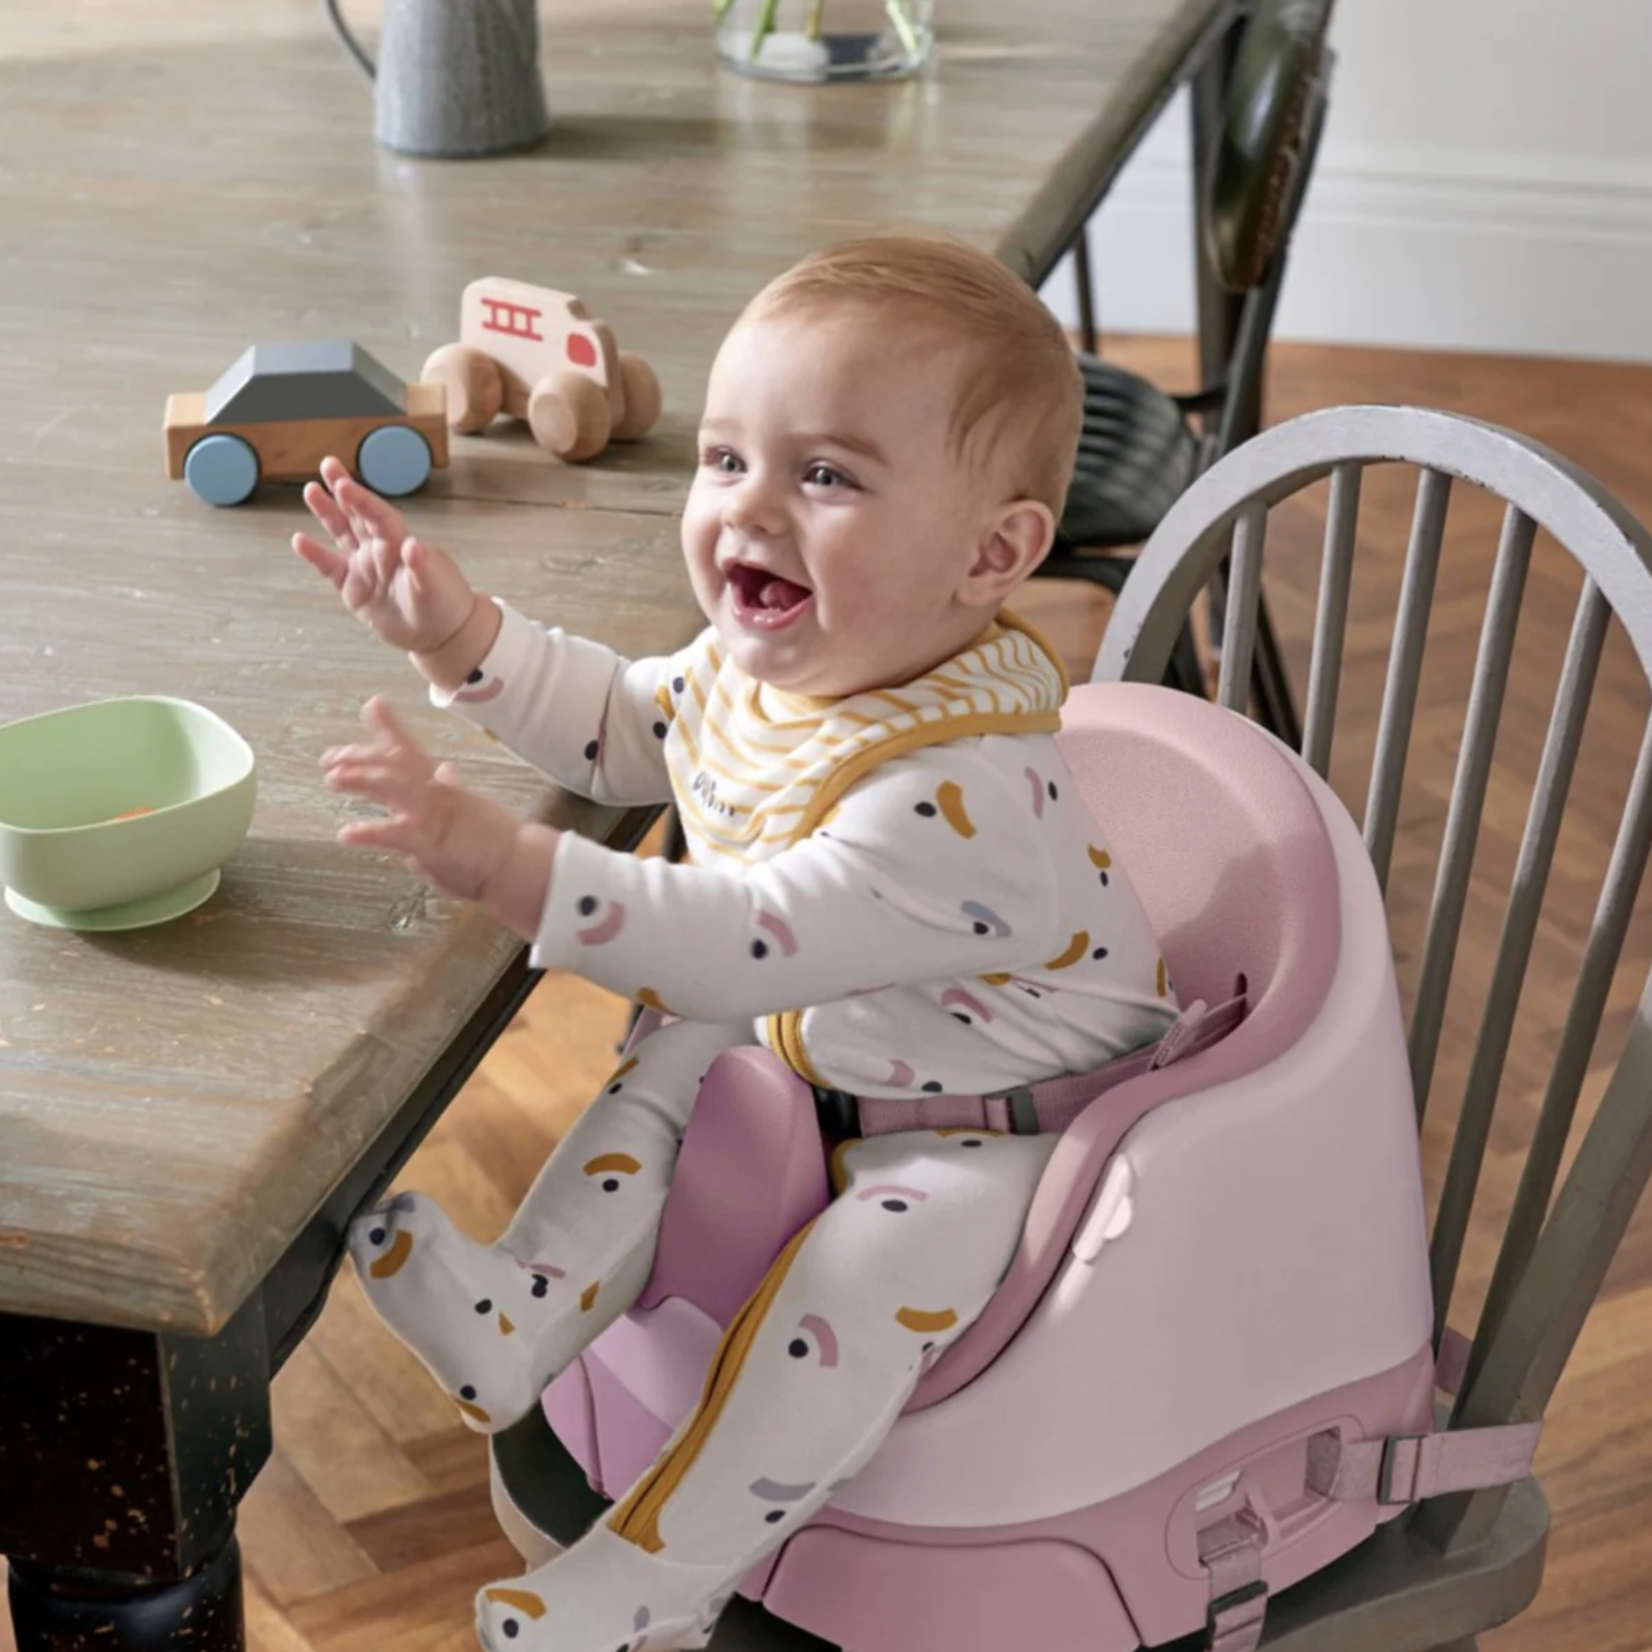 Mamas & Papas Bug 3-in-1 Floor & Booster Seat with Activity Tray - Blossom